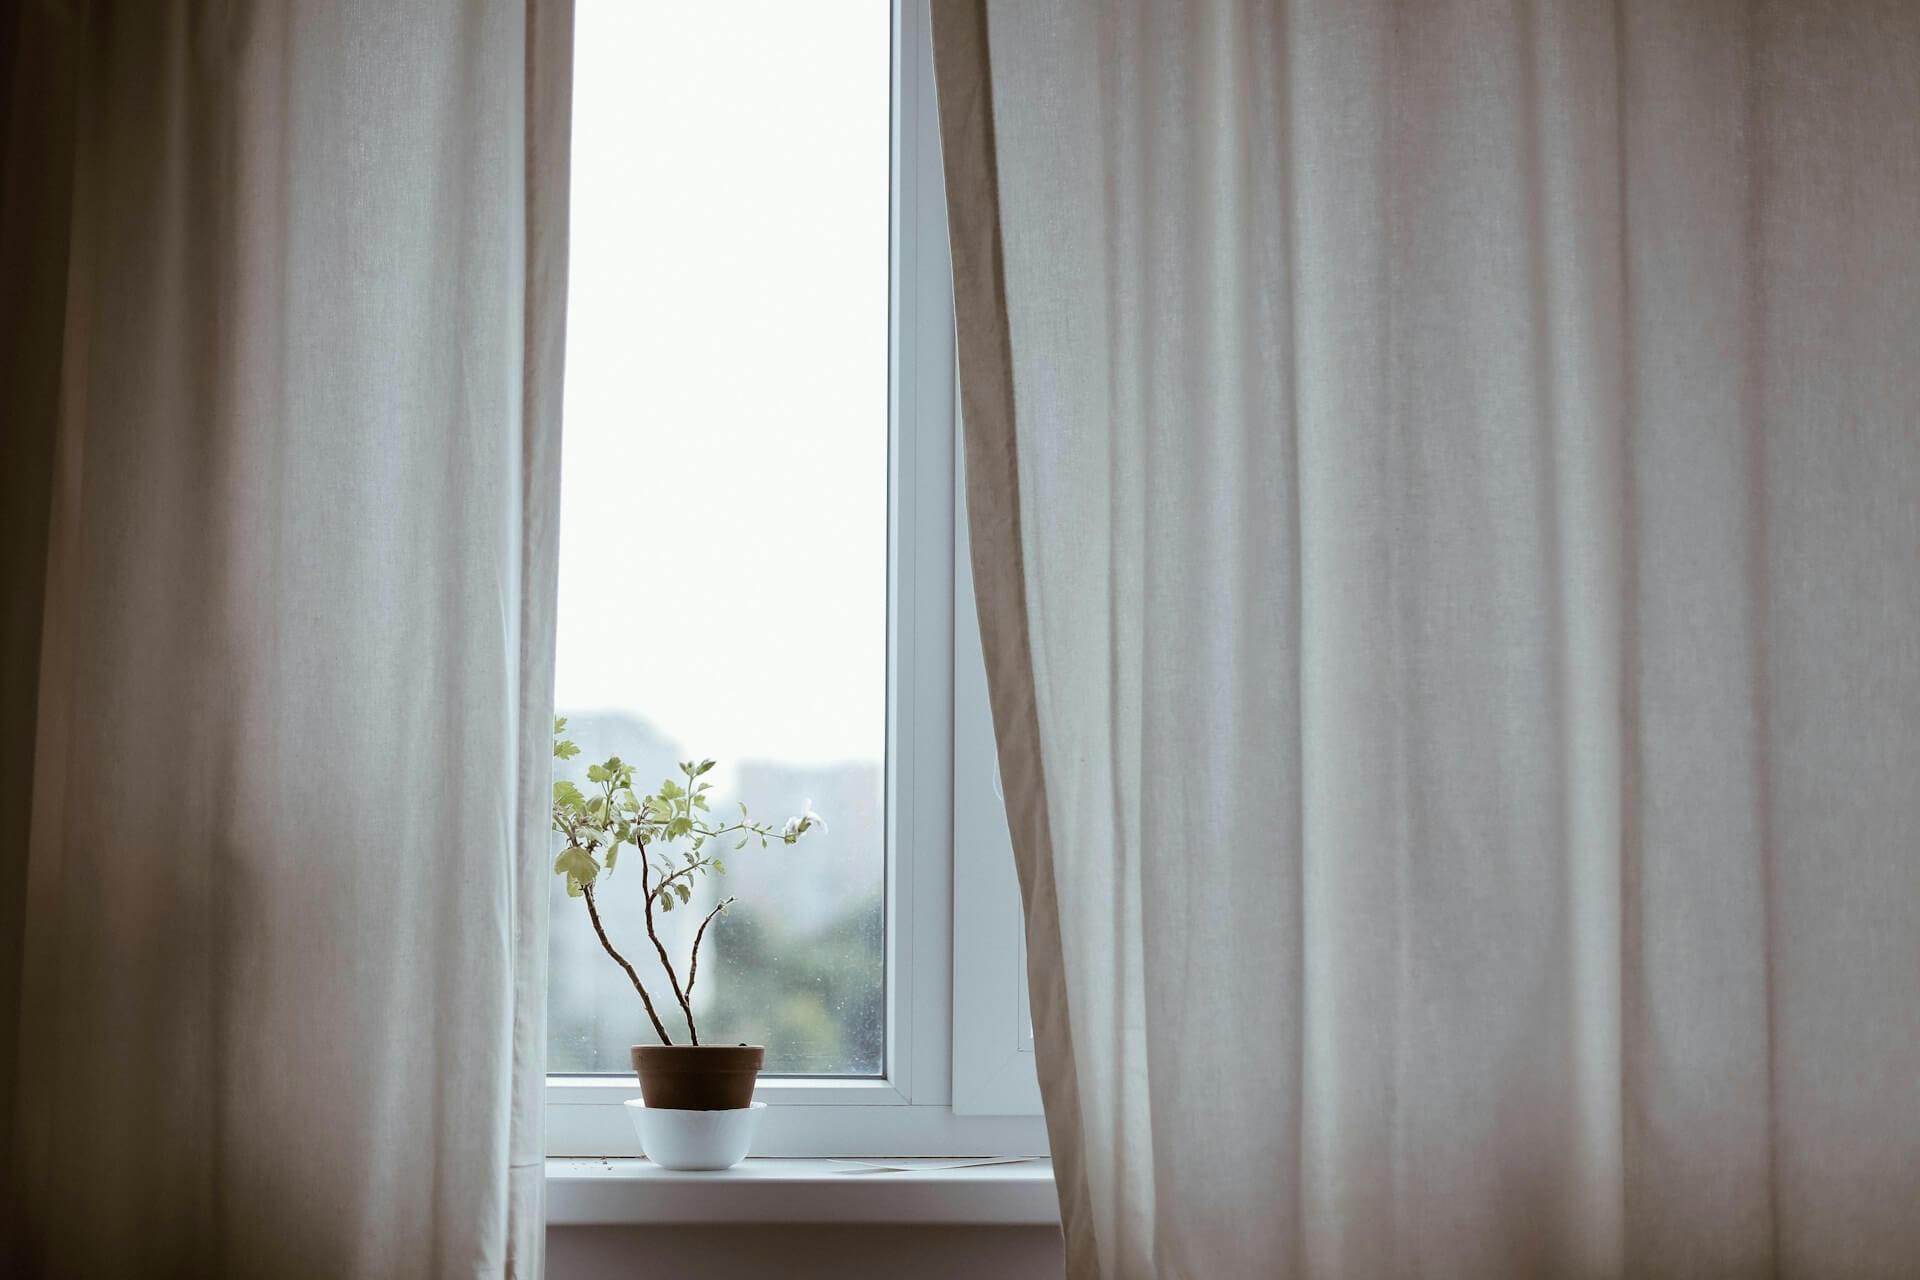 How To Find The Perfect Curtain Style For Your Home's Aesthetic